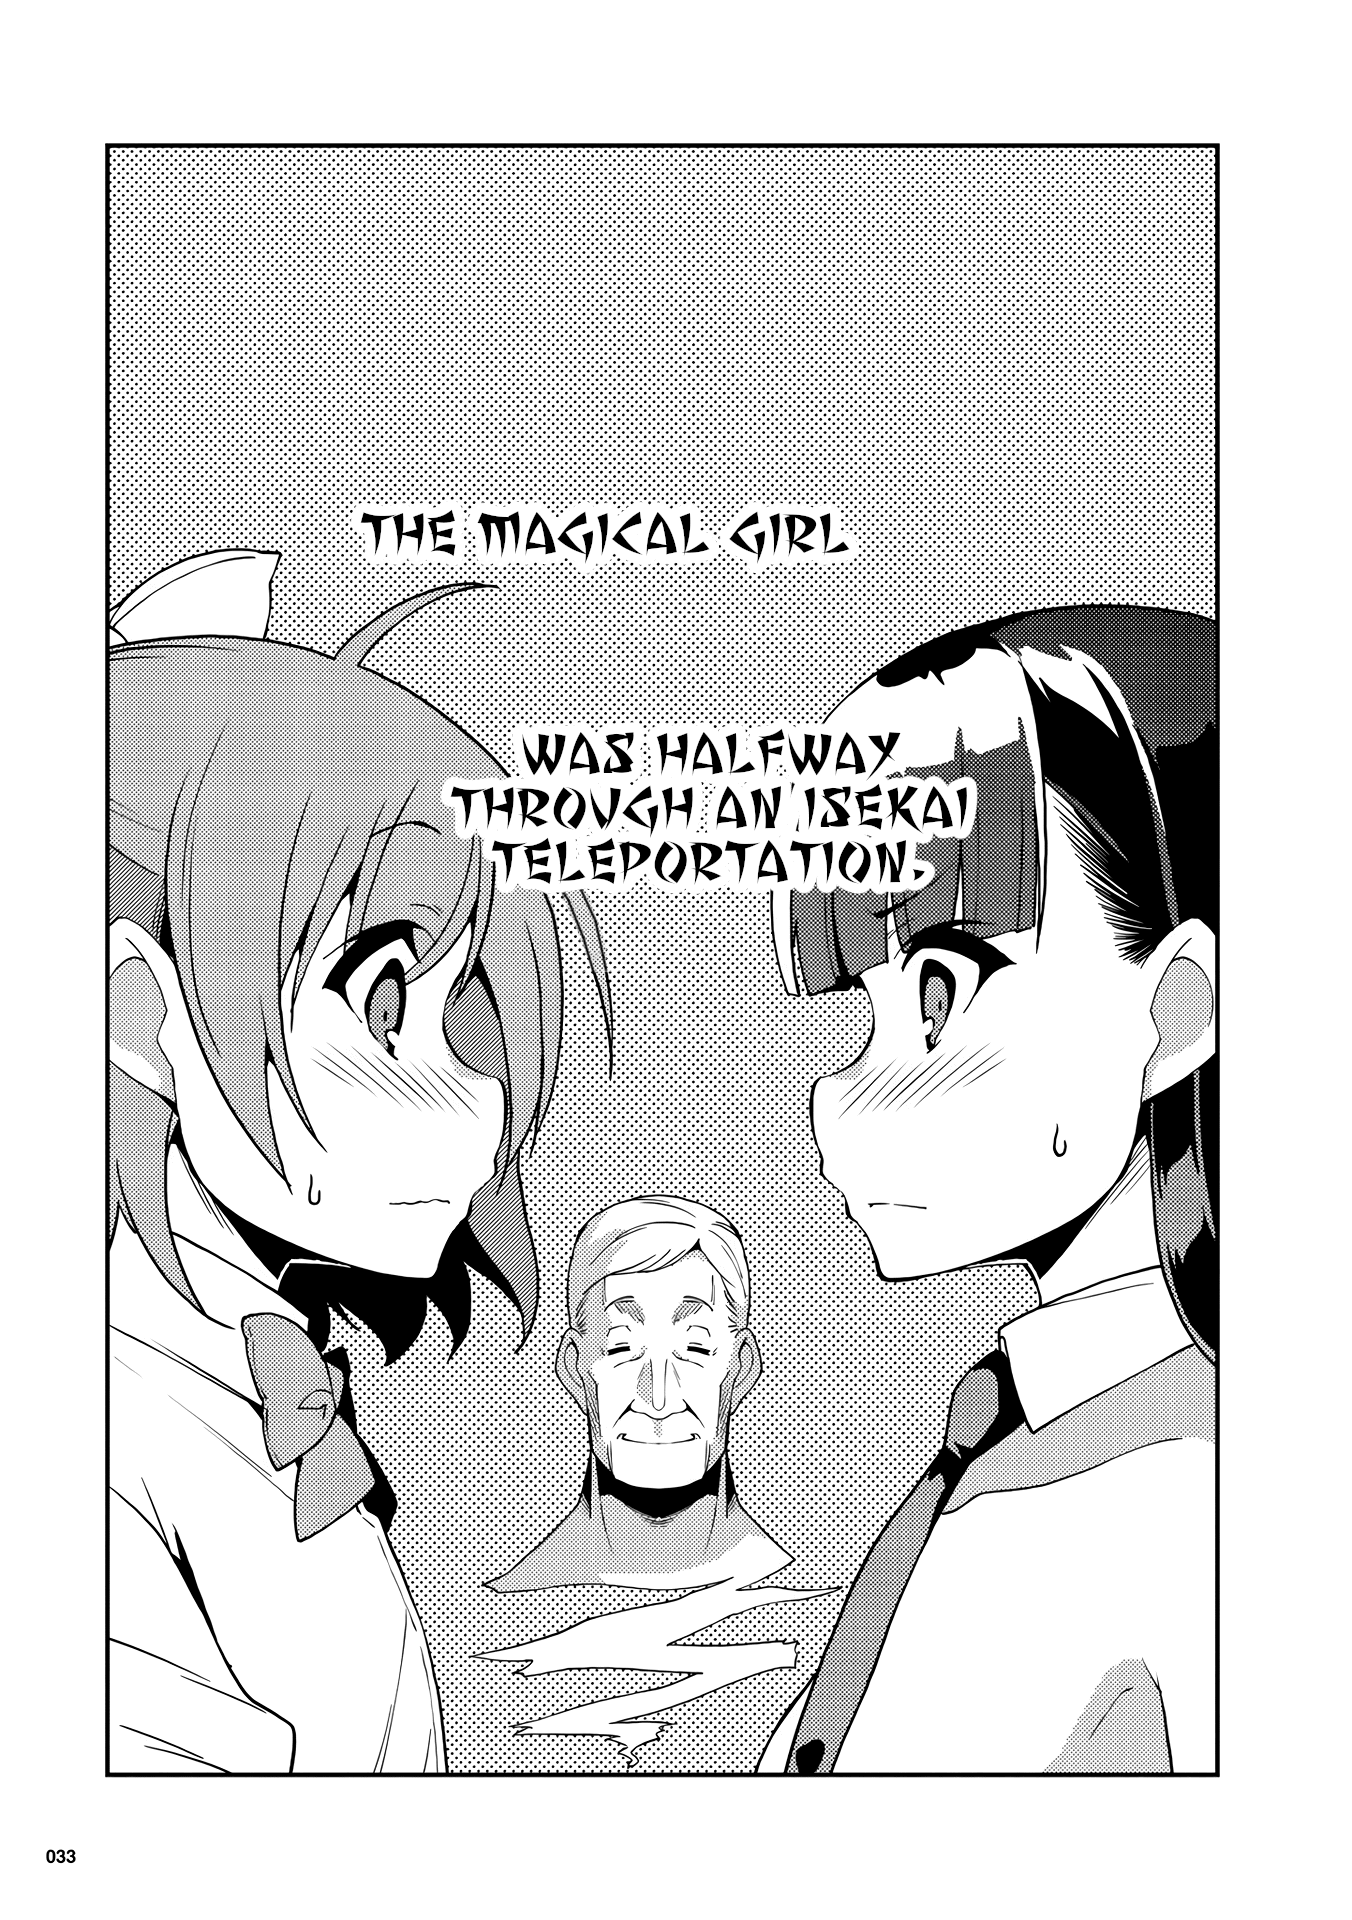 Girls From Different Worlds - Page 3